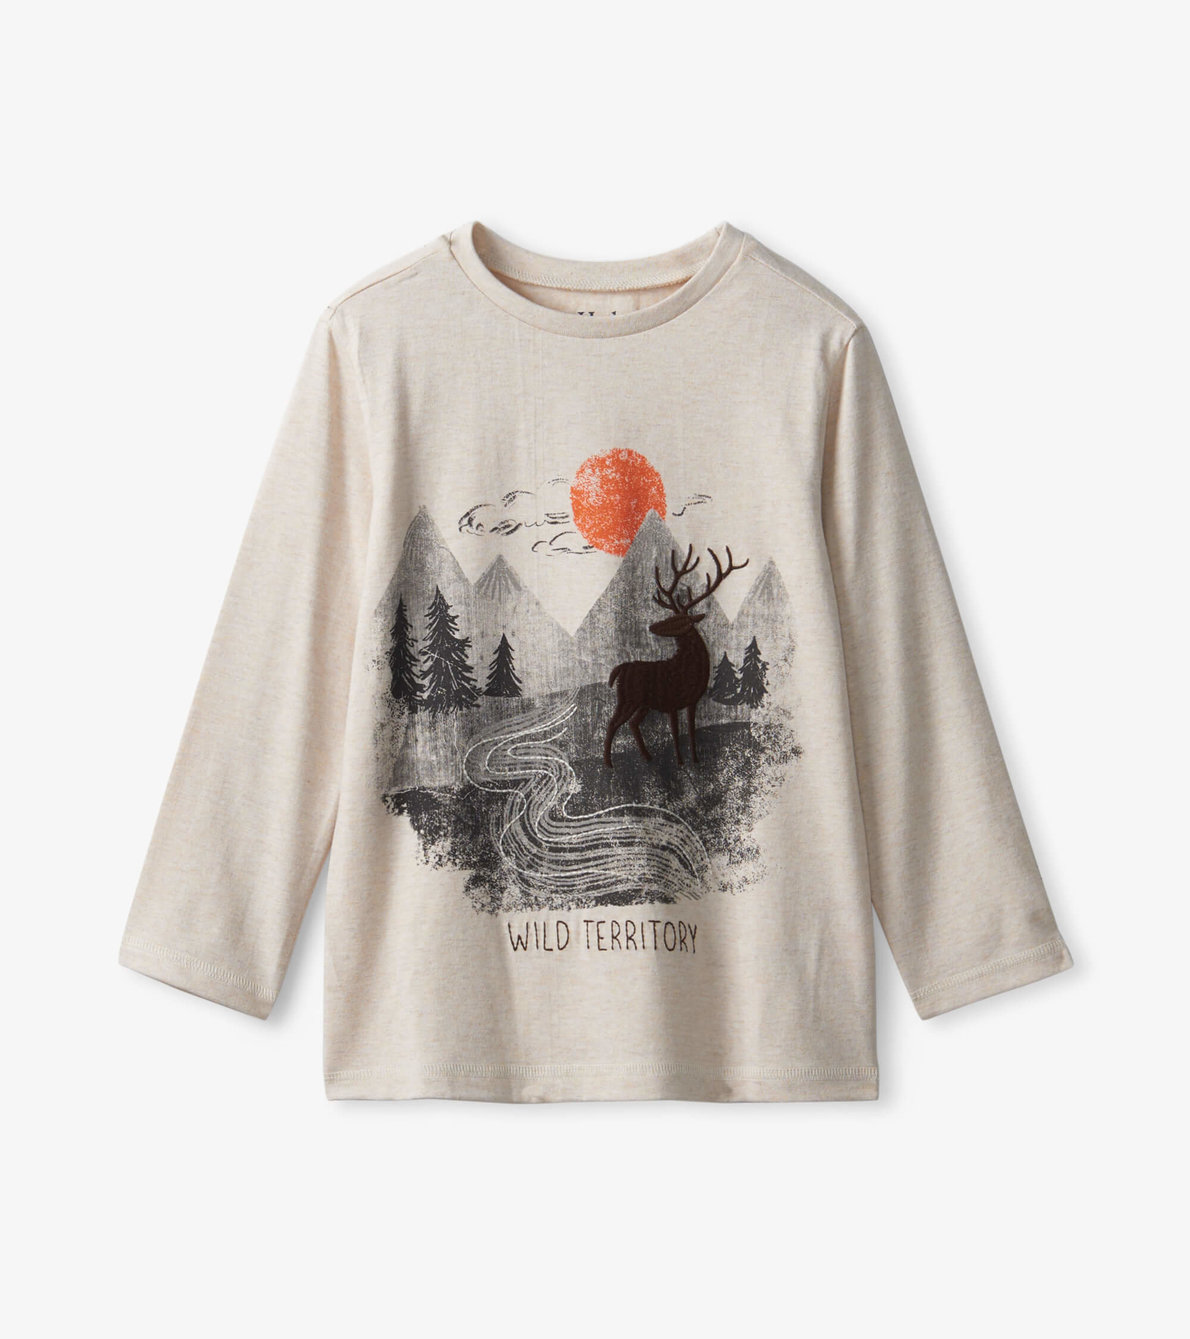 View larger image of Boys Rocky Landscape Long Sleeve T-Shirt